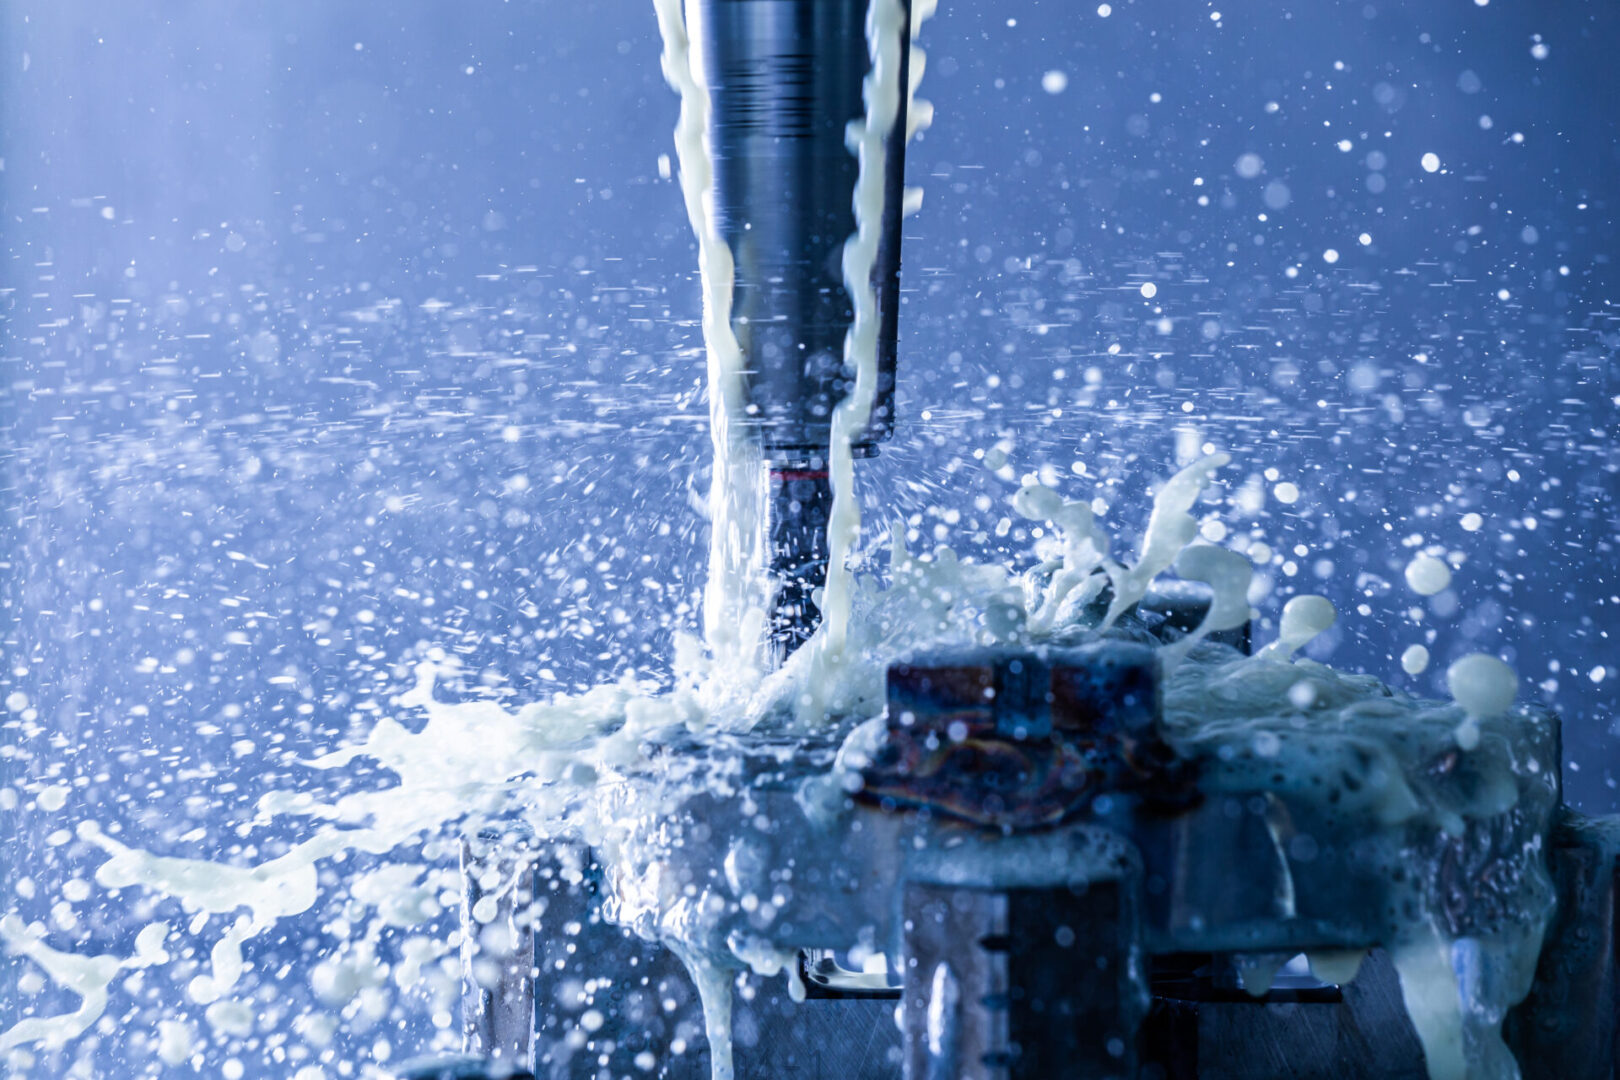 Abstract process of vertical cnc steel milling in slim hydraulic clamping chuck with external water coolant streams and splashes, close-up with blue tone, selective focus and background blur. Fast shutter speed for motion freezing.